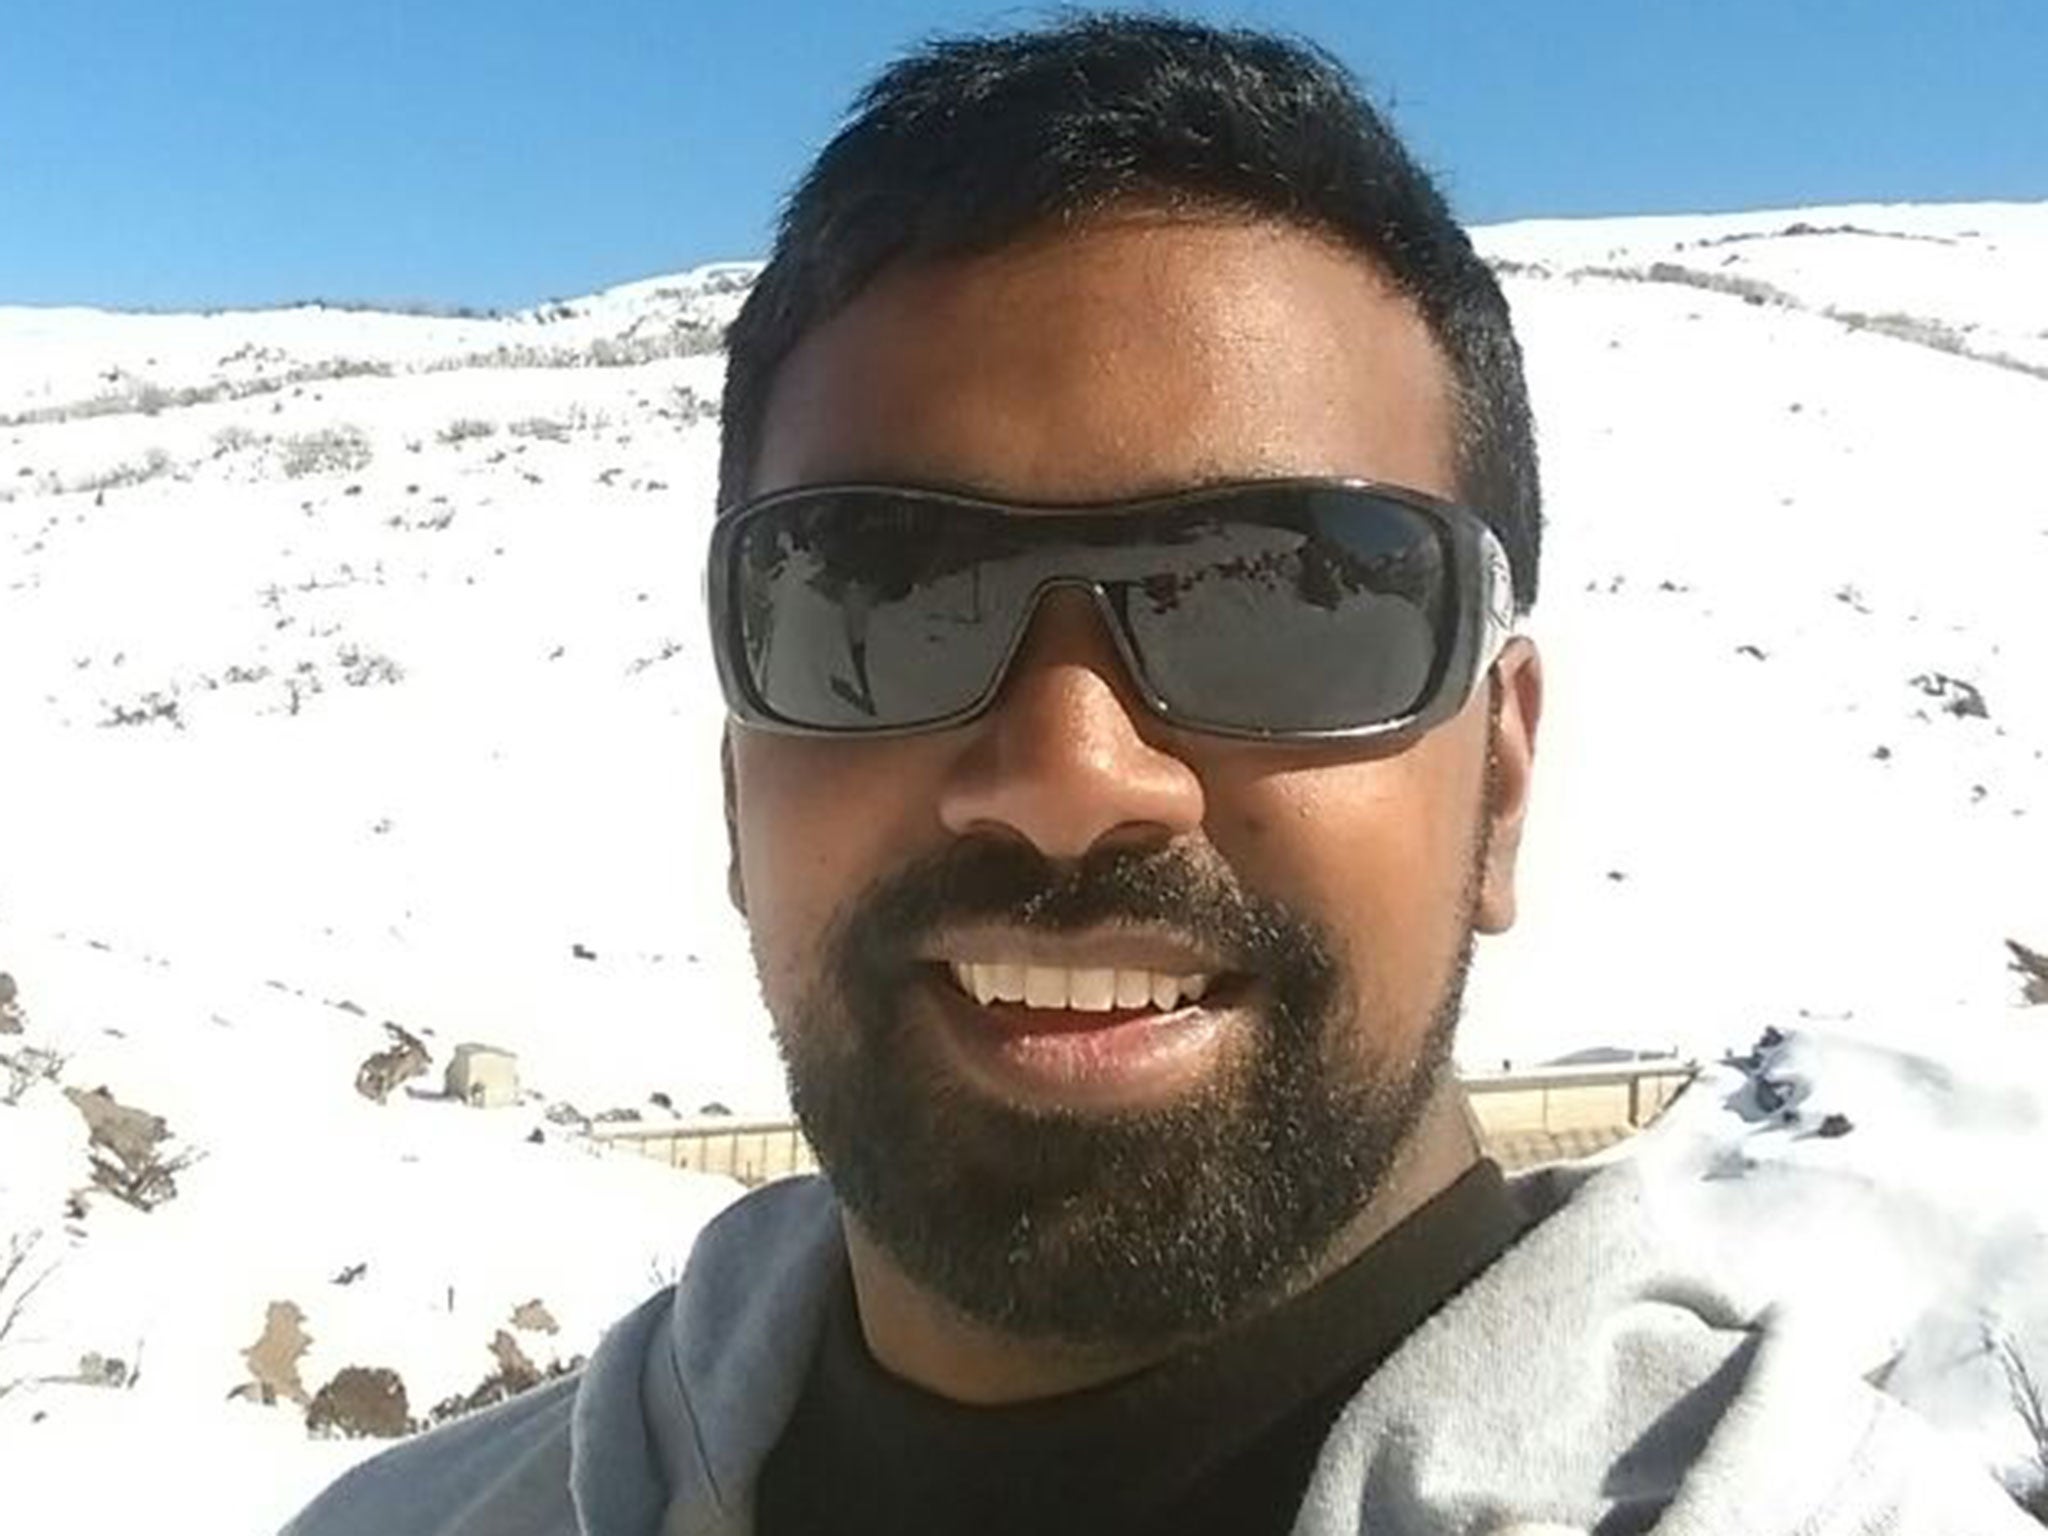 Rav Pillay, 27, is still missing after Sunday's disaster. He was on the boat with his girlfriend and her family.